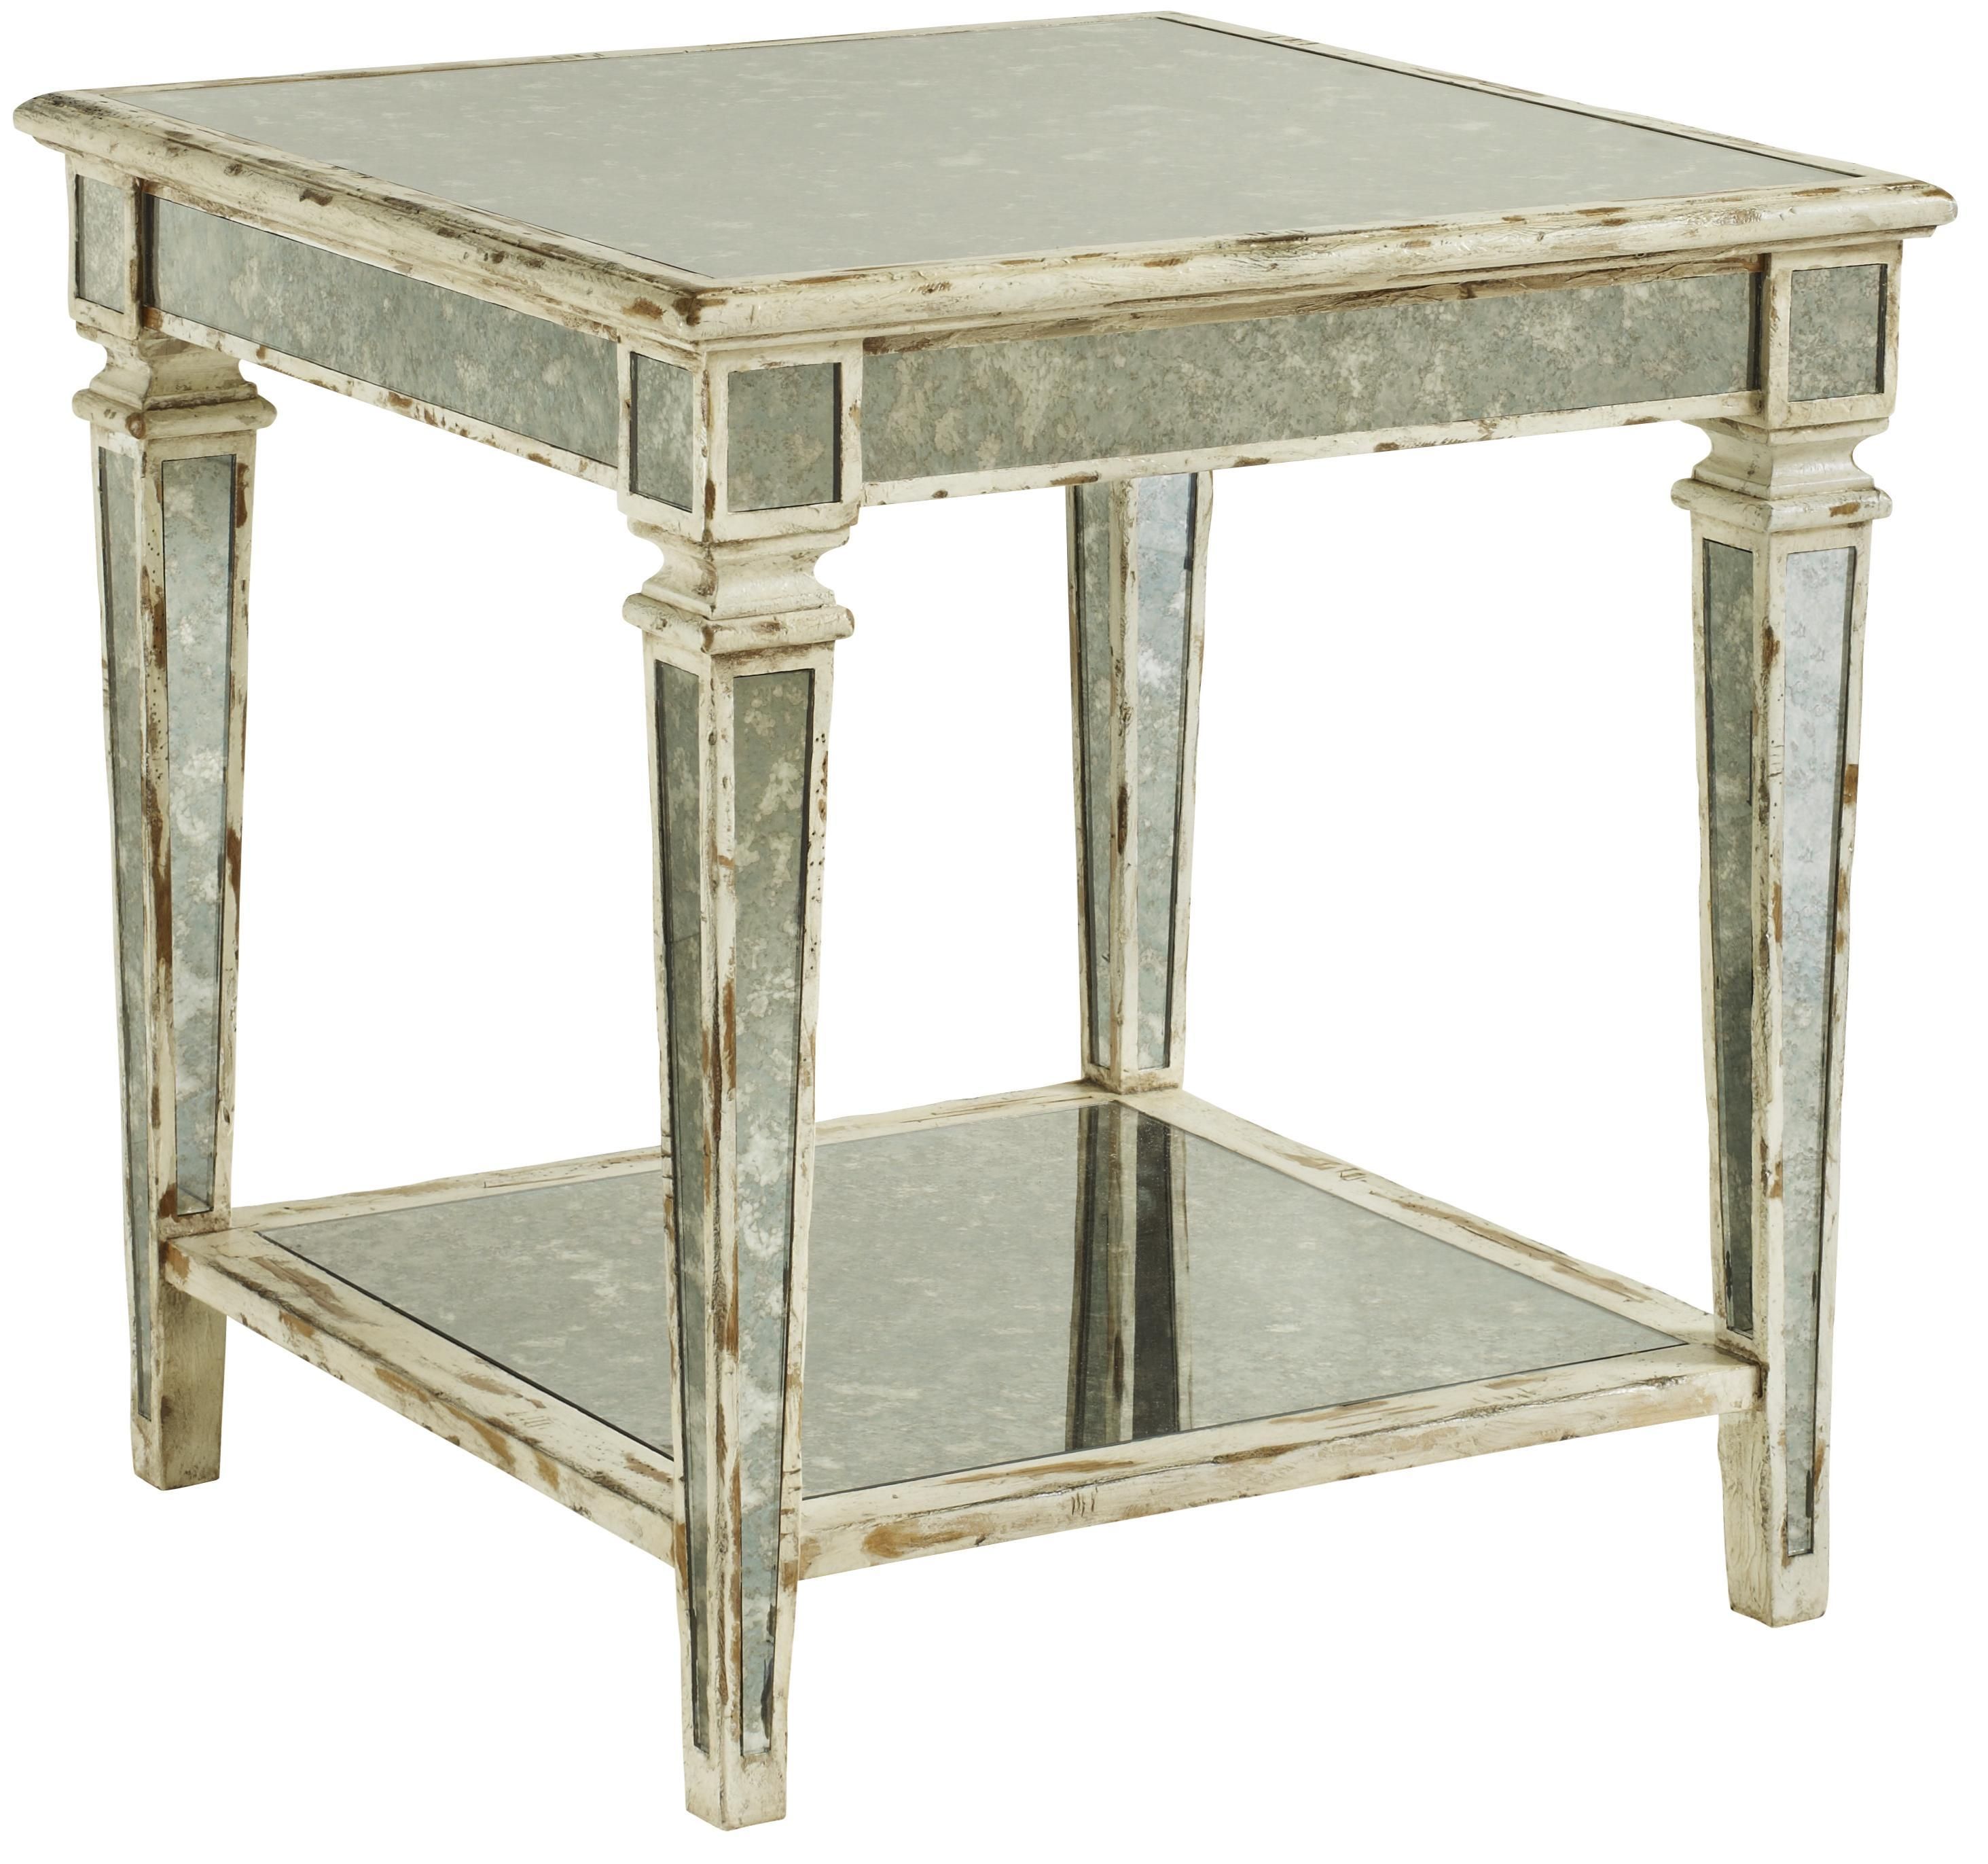 End Table W/ Antique Mirror Insertfine Furniture Design | Wolf Intended For Antique Mirrored Furniture (View 10 of 20)